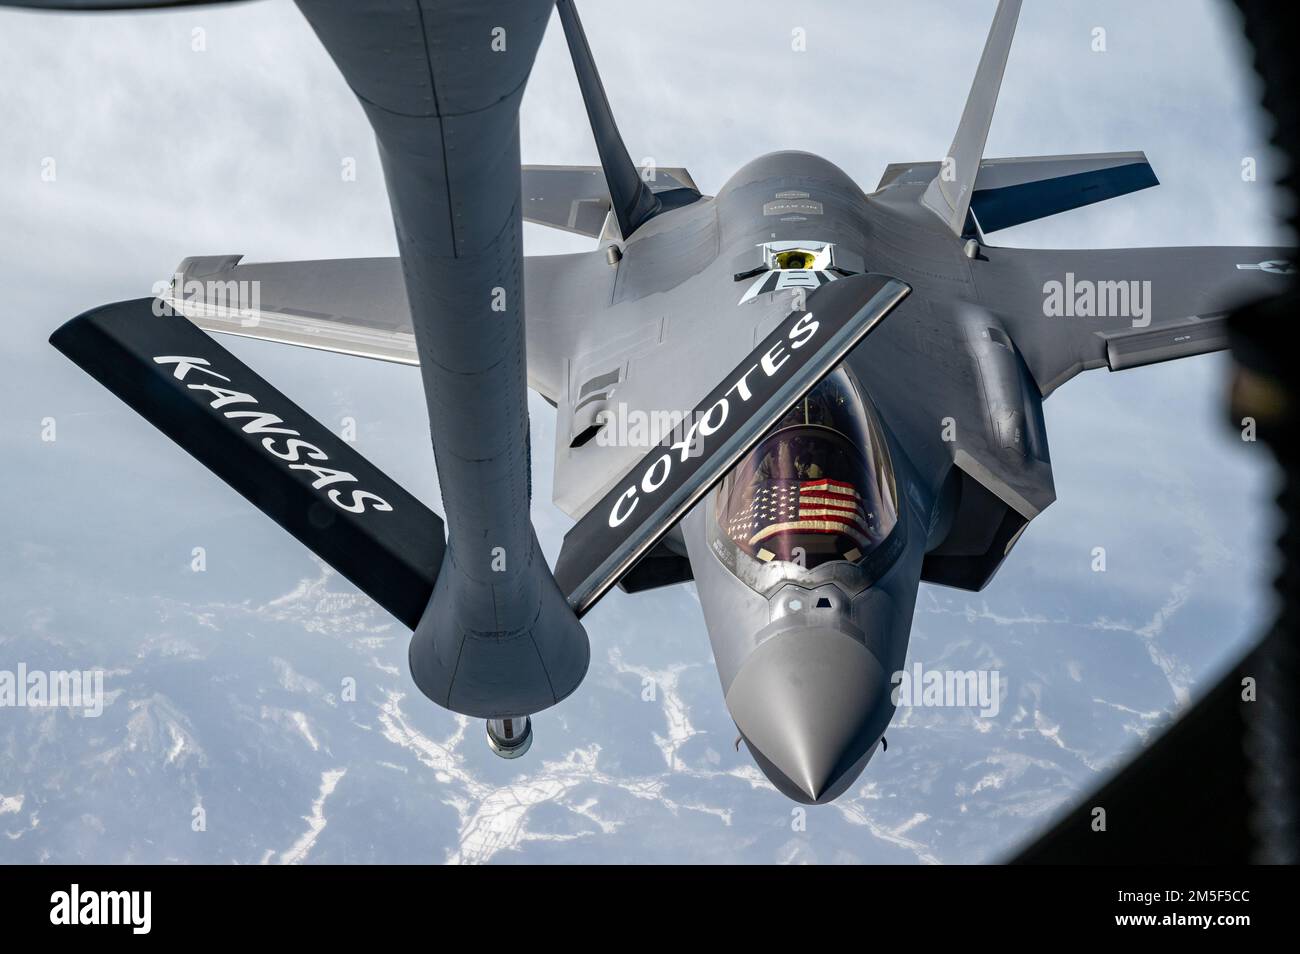 An F-35A Lightning II from the 354th Fighter Wing, Eielson Air Force Base, Alaska, approaches a KC-135 Stratotanker assigned to the 117th Air Refueling Squadron, Forbes Field Air National Guard Base, Kansas, over the Indo-Pacific, March 10, 2022. The F-35As are currently deployed to Kadena Air Base, Japan, conducting integrated operations with joint partners and allies to ensure a free and open Indo-Pacific region. Stock Photo